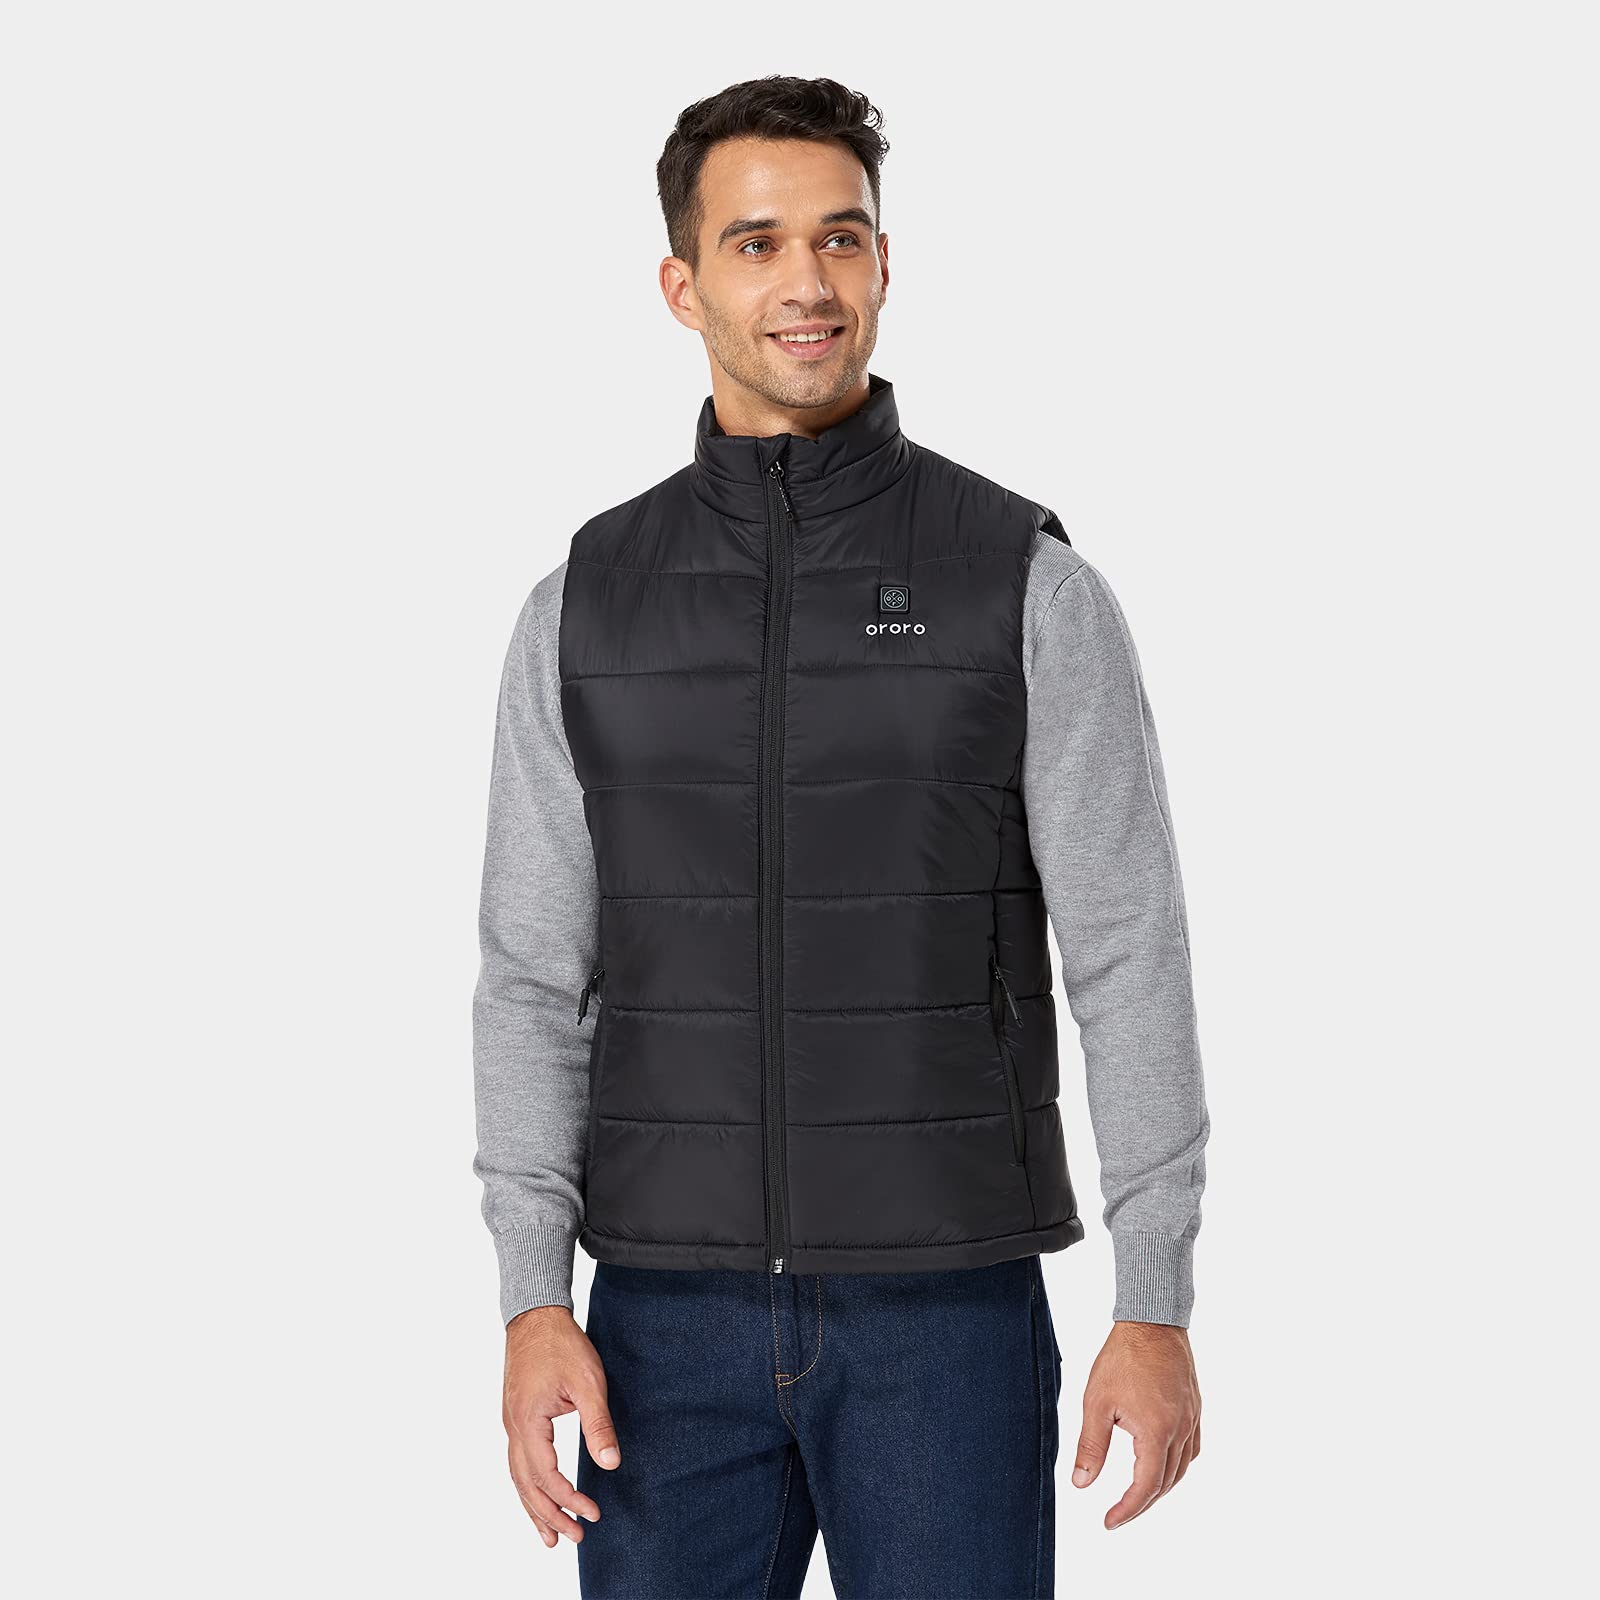 ORORO Men's Lightweight Heated Vest with Battery Pack - Large - Black (7527888224494)